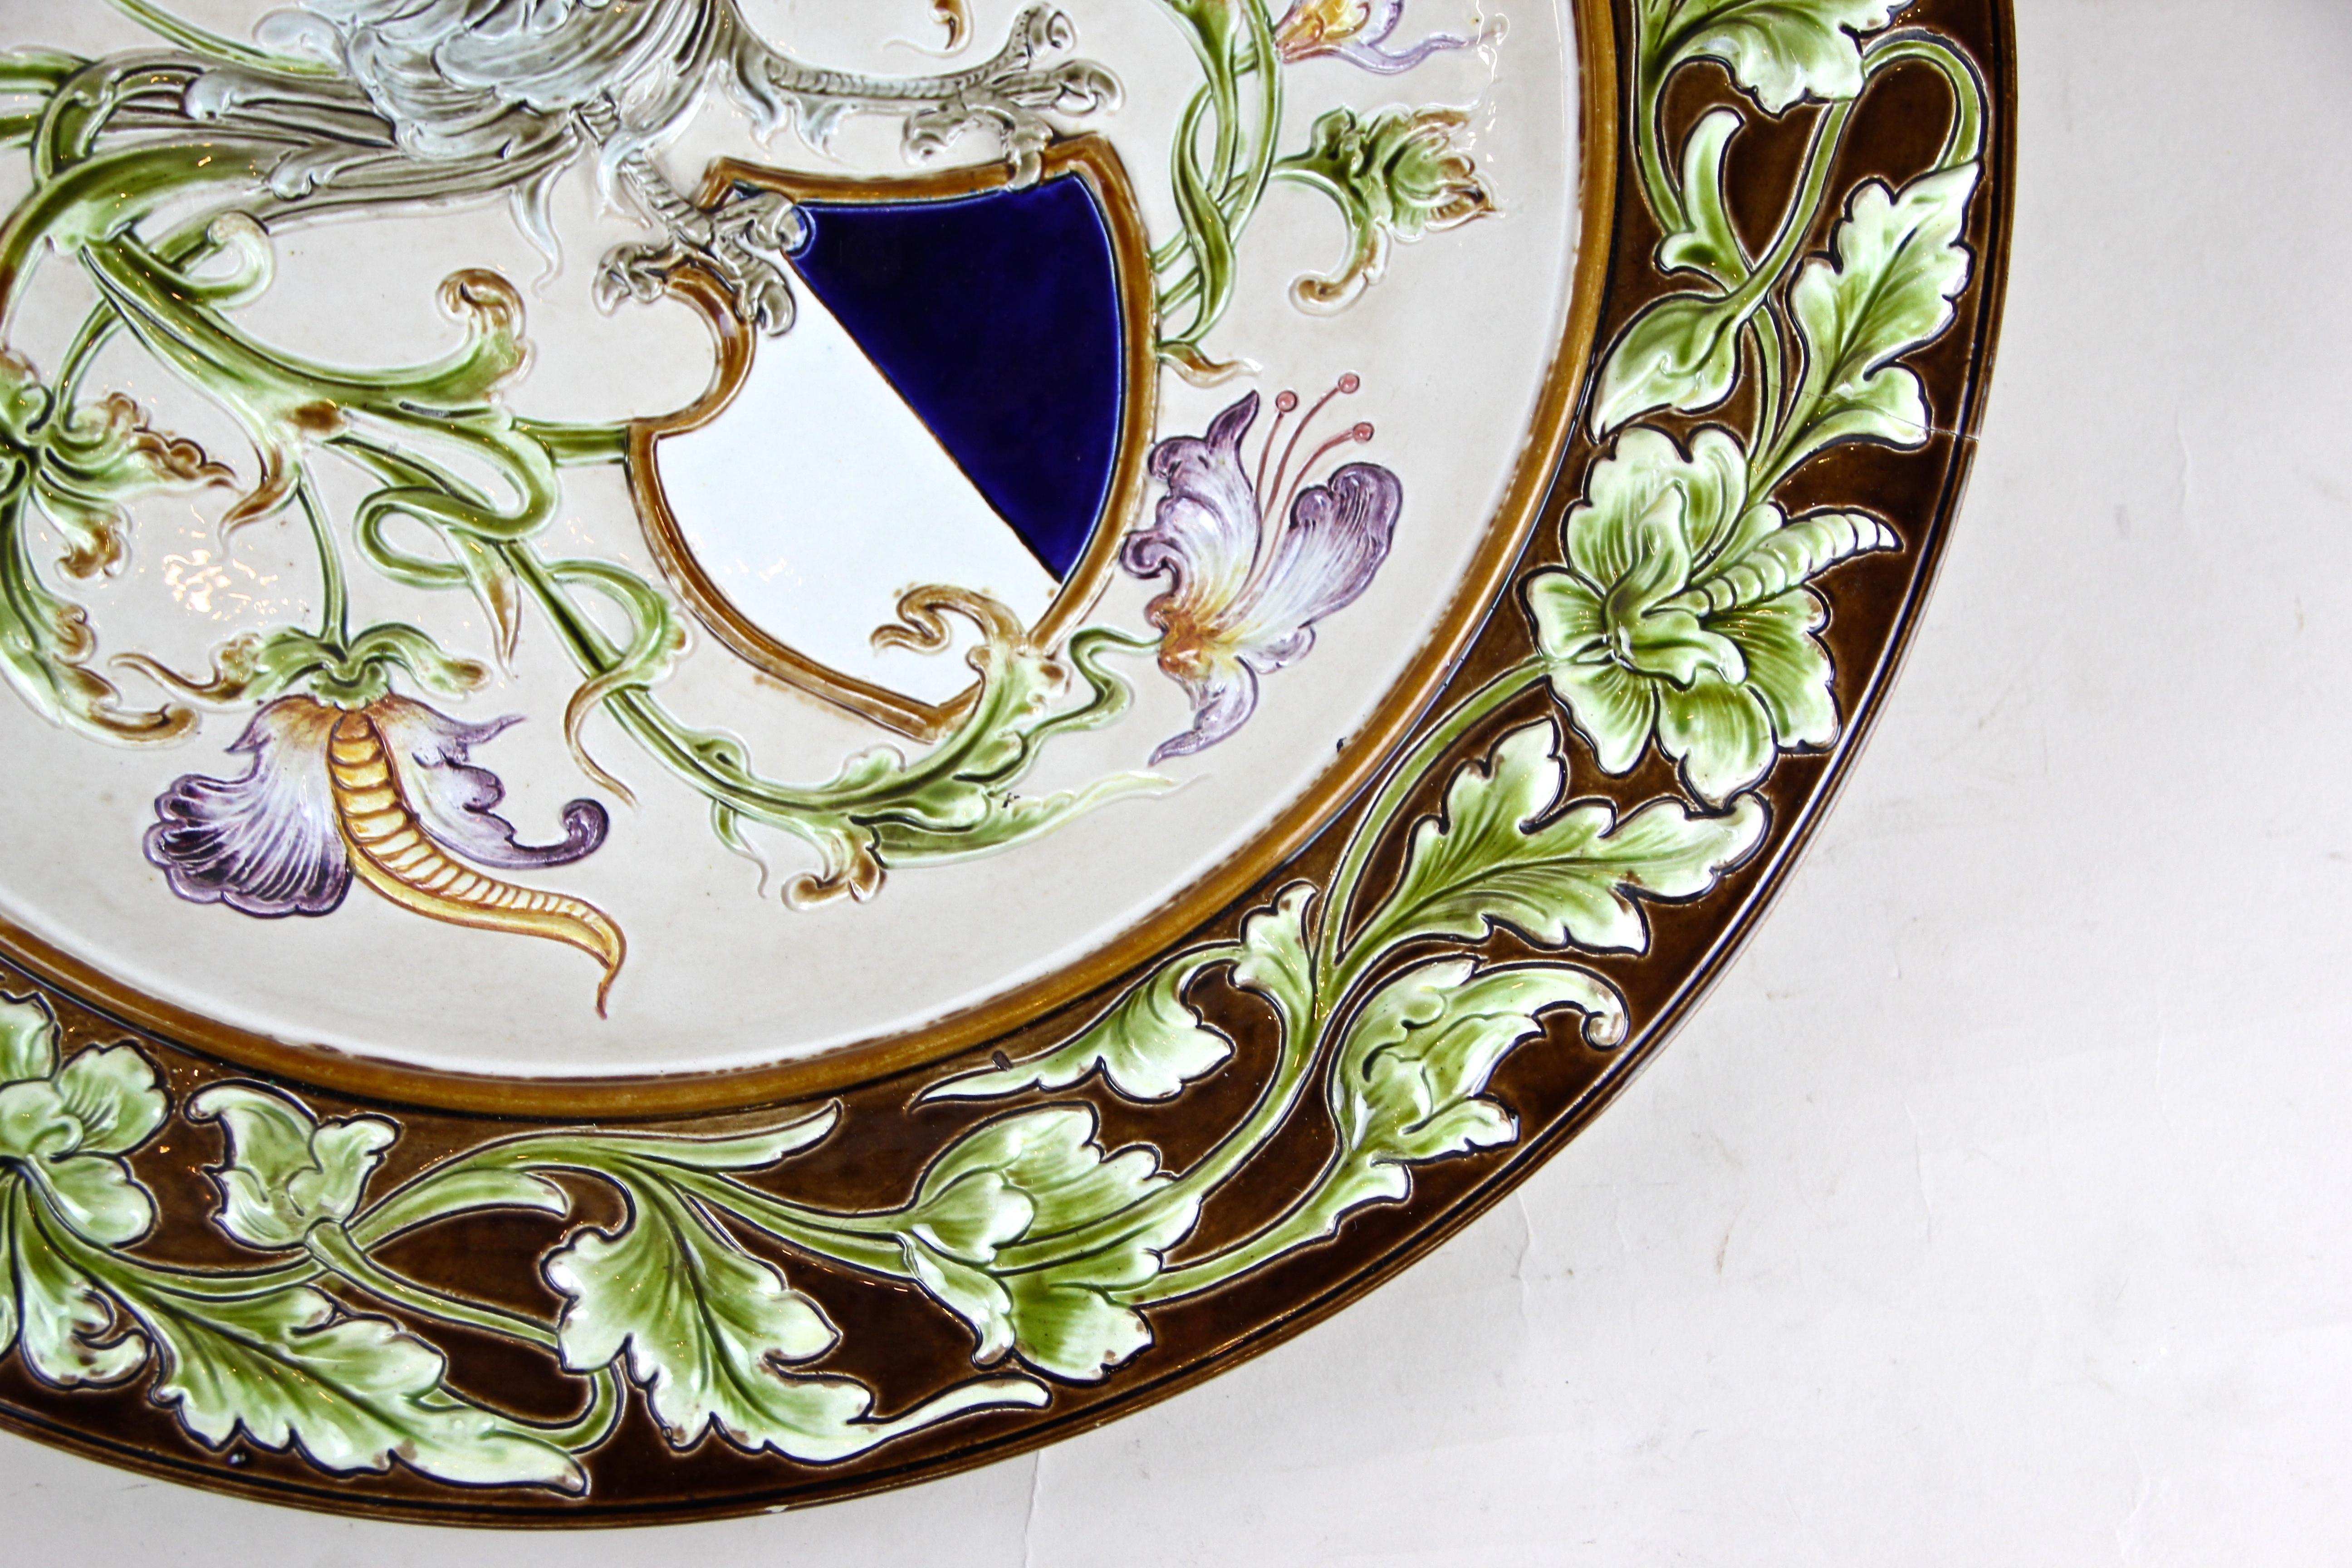 Hand-Painted Large Majolica Wall Plate by Wilhelm Schiller & Son, Bohemia, circa 1890